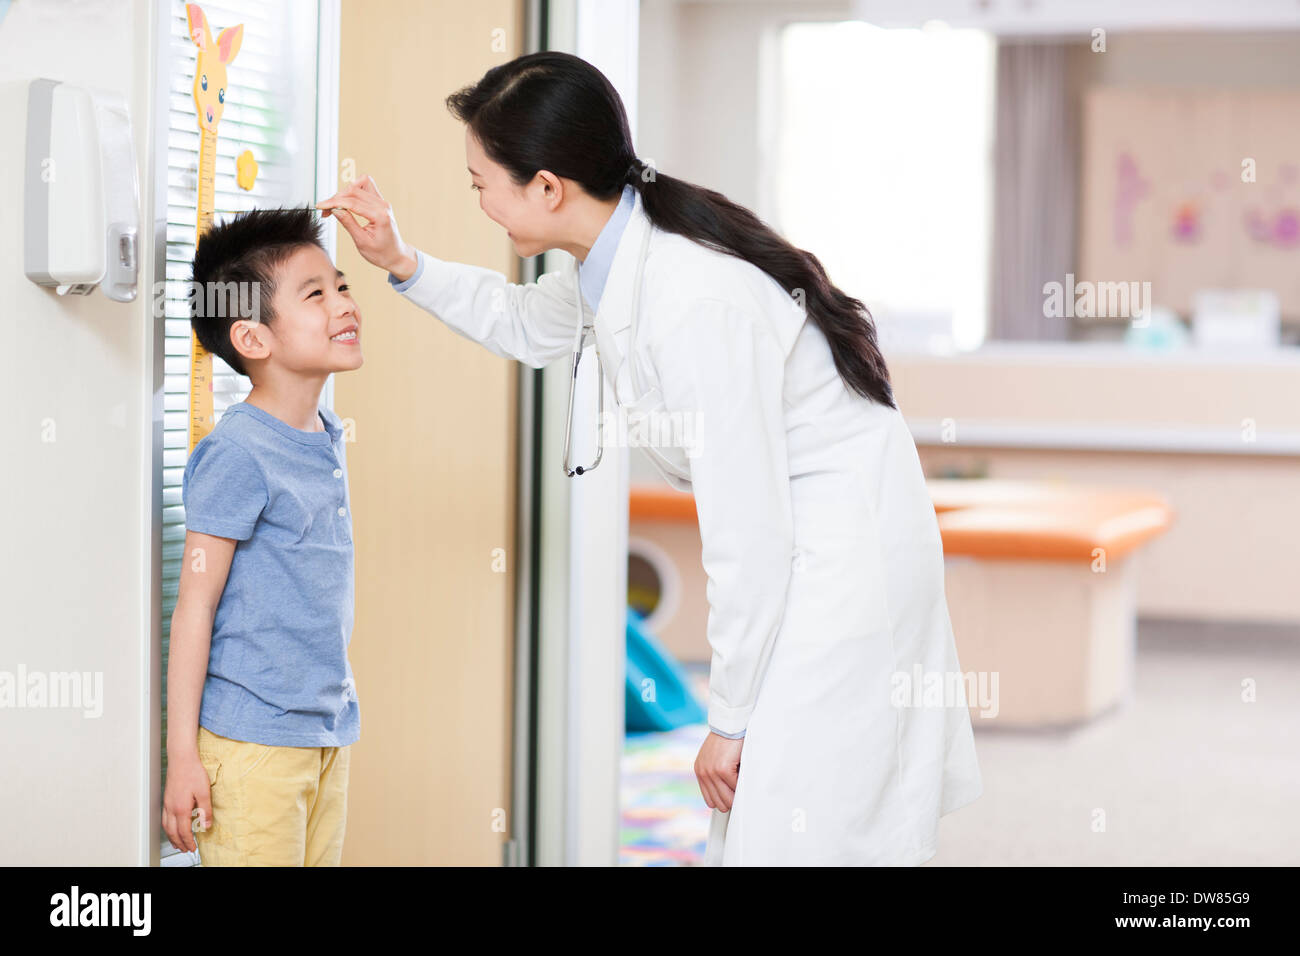 Doctor measuring boy's height Stock Photo